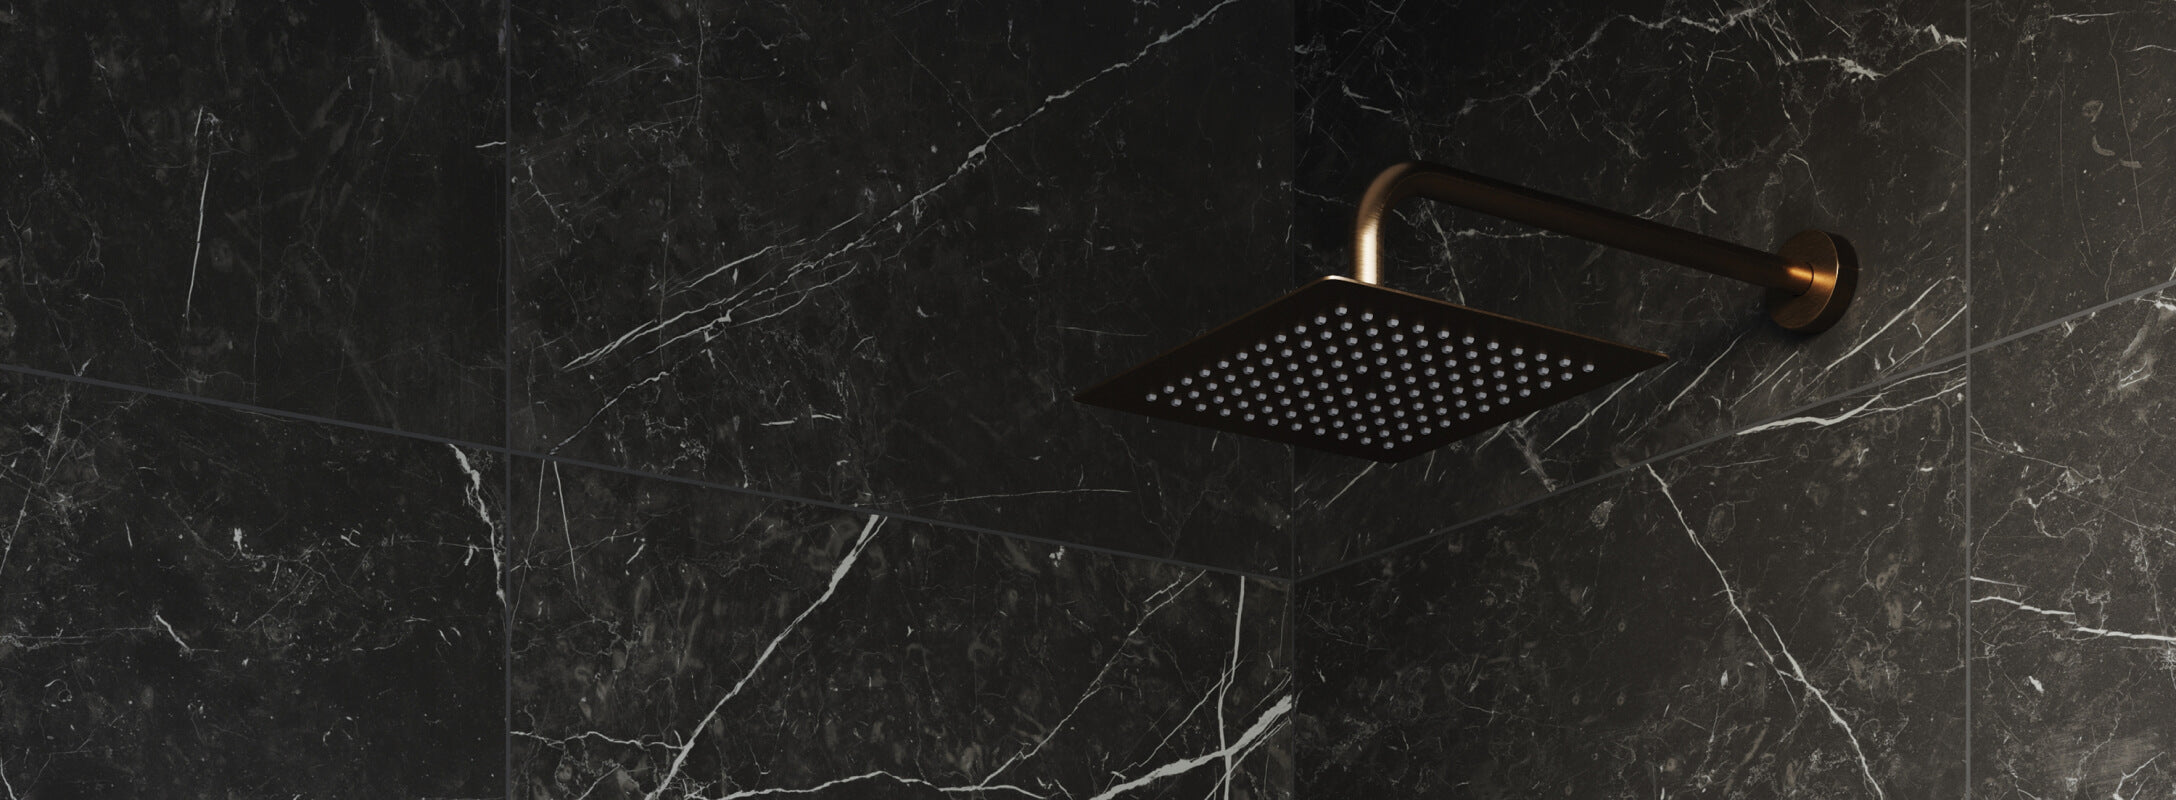 Luxurious shower featuring a sleek black marble wall with intricate white veining and a modern gold showerhead, embodying sophistication and elegance